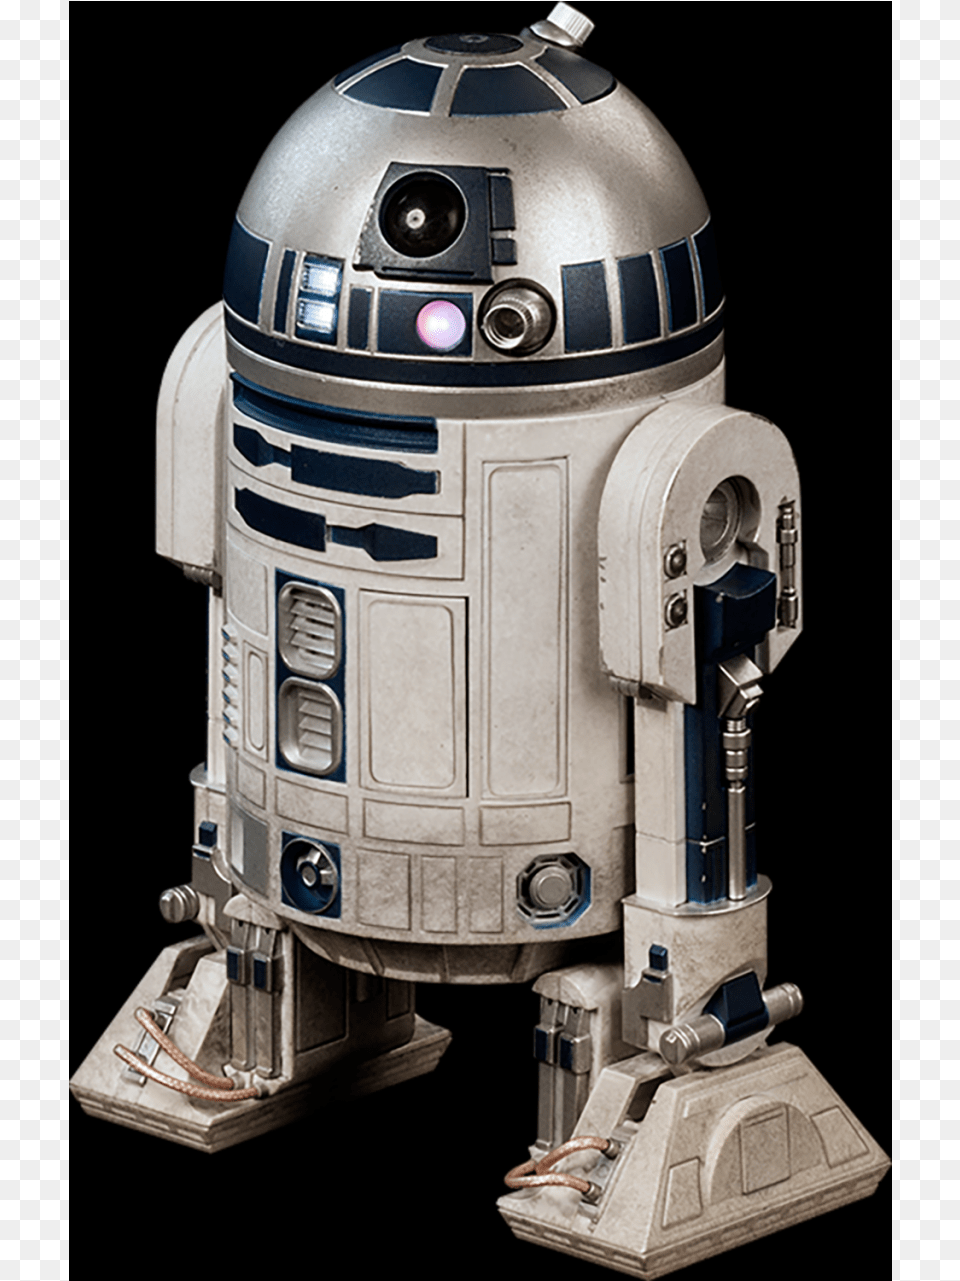 D2 Deluxe Star Wars Figure R2 D2 Deluxe Star Wars Sixth Scale Figure, Robot, Toy Png Image